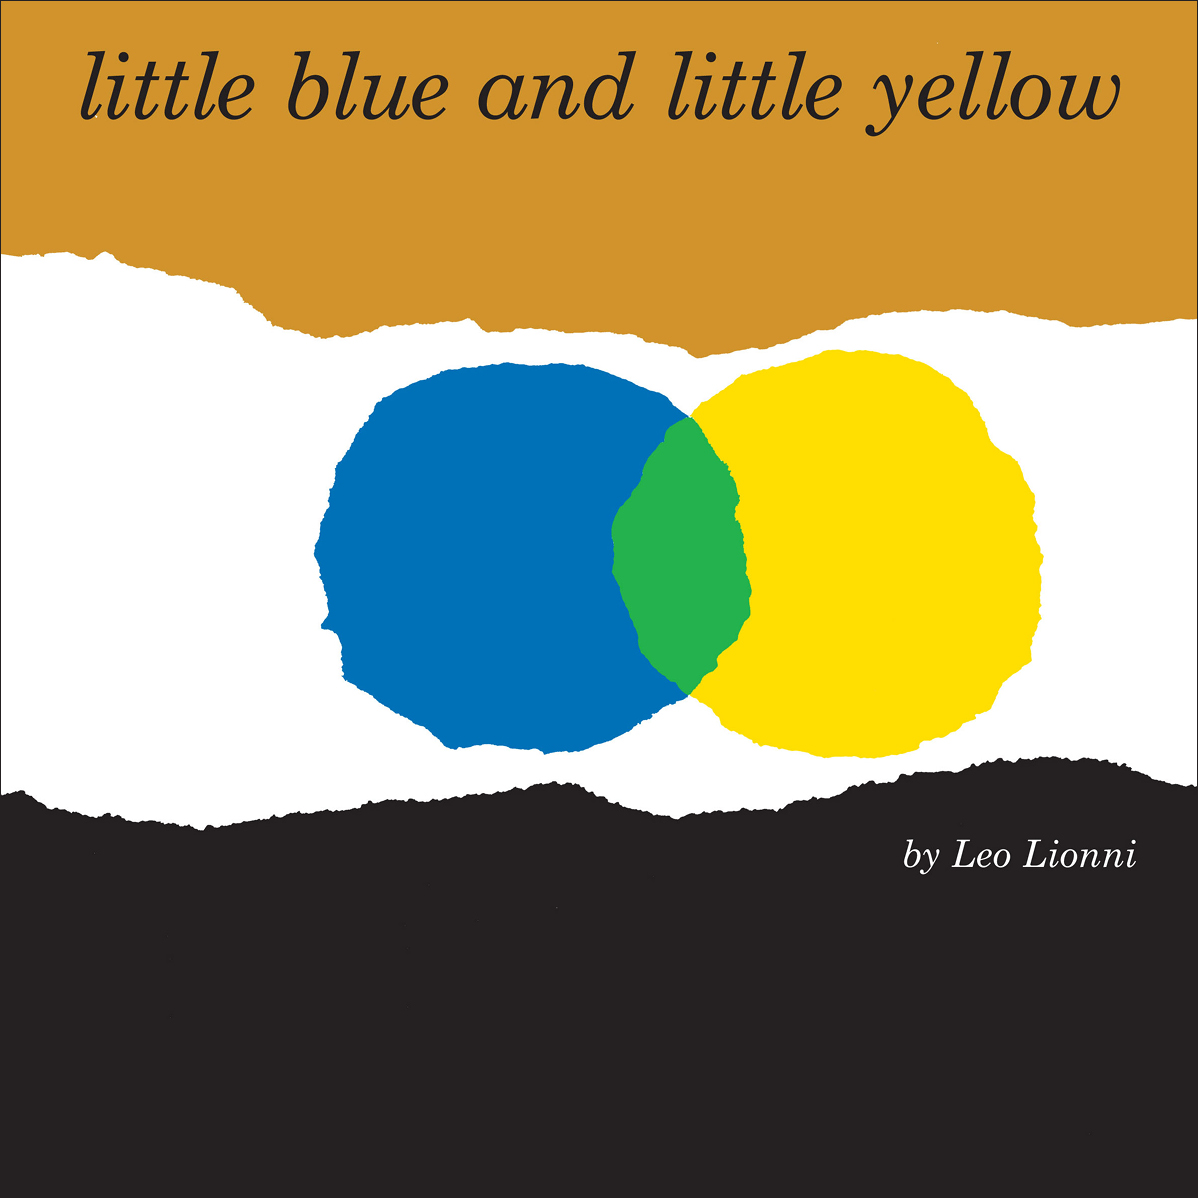 square minimalist book cover with black, white, and brown background and little blue and little yellow overlapping in the middle to make green